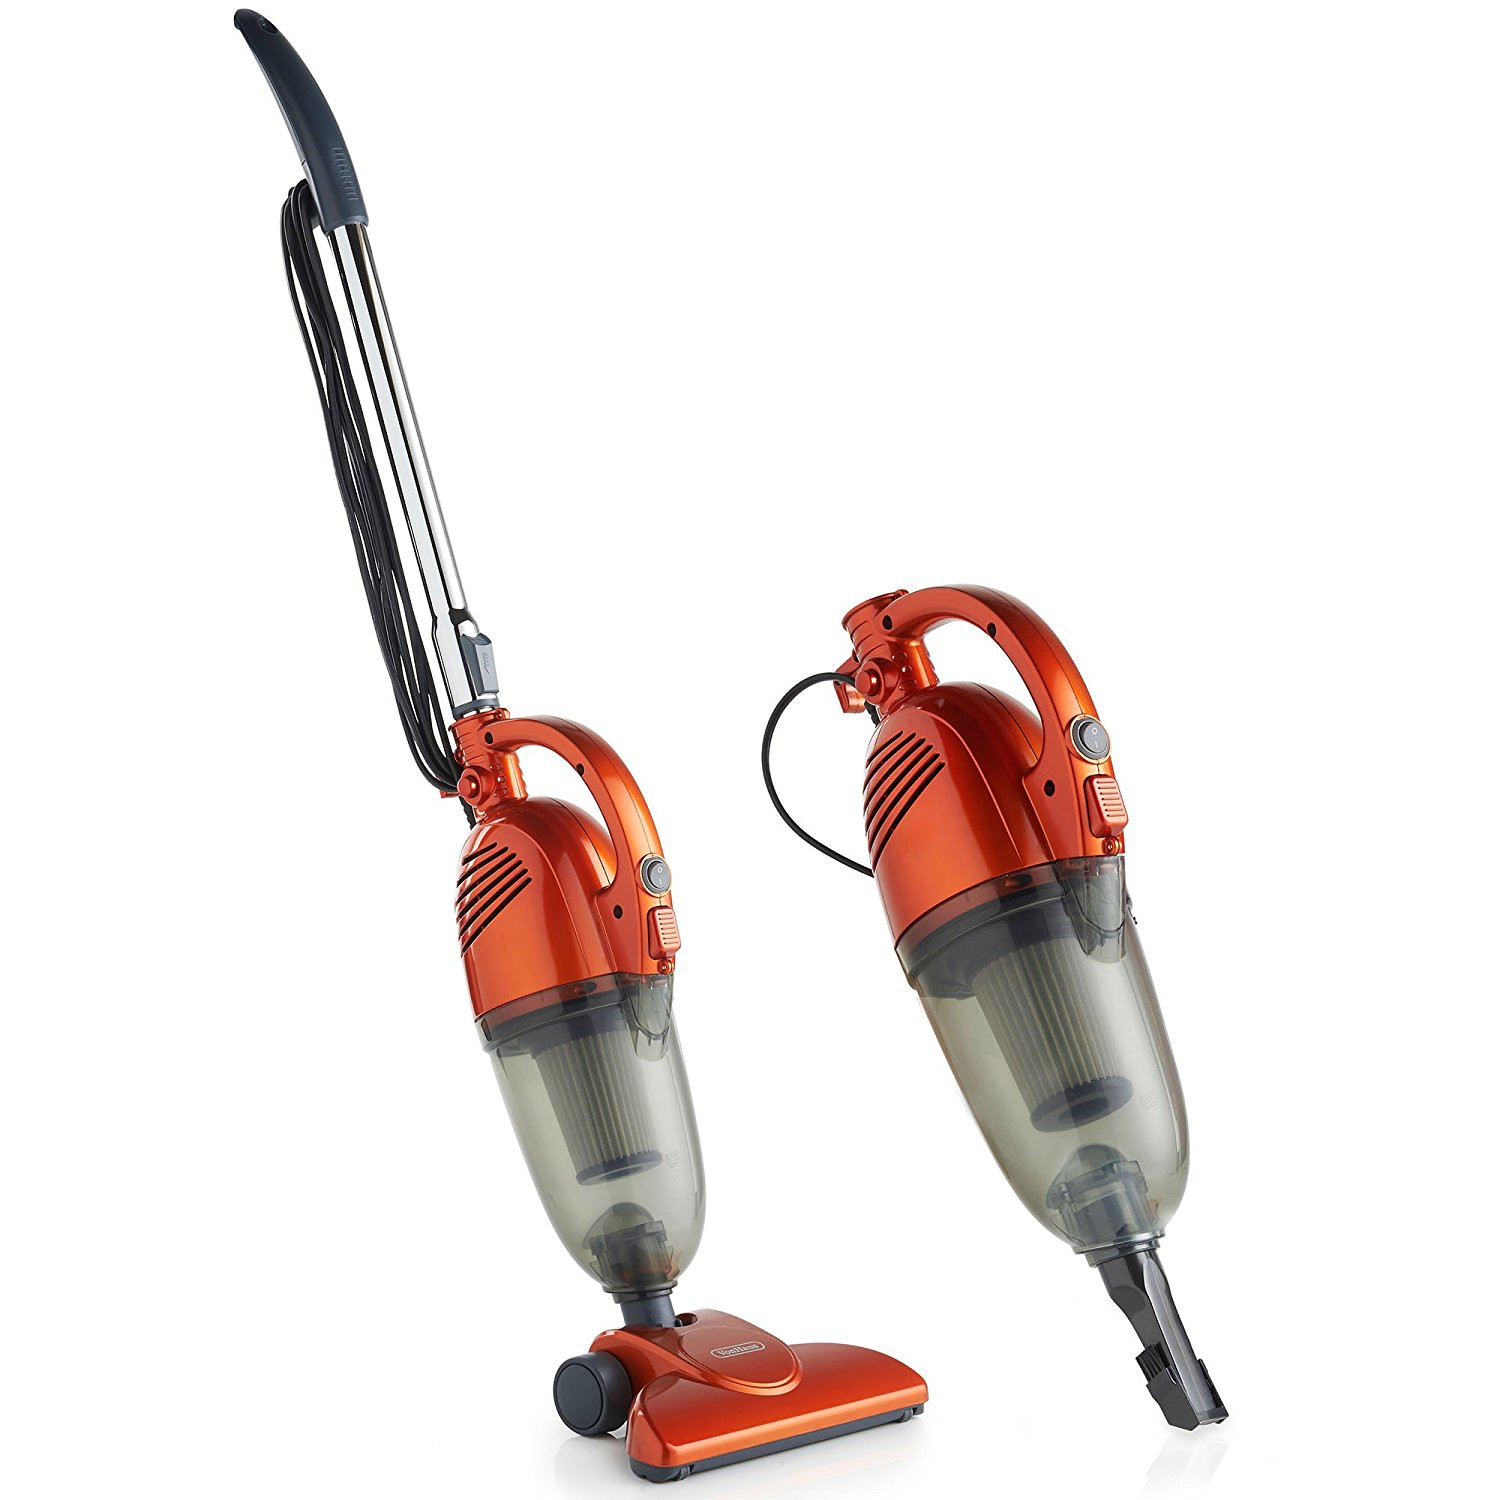 11 Lovable Lightweight Hardwood Floor Vacuum Reviews 2024 free download lightweight hardwood floor vacuum reviews of 10 best vacuum for hardwood floors in 2018 complete guide with vonhaus 600w 2 in 1 corded upright stick handheld vacuum cleaner with hepa